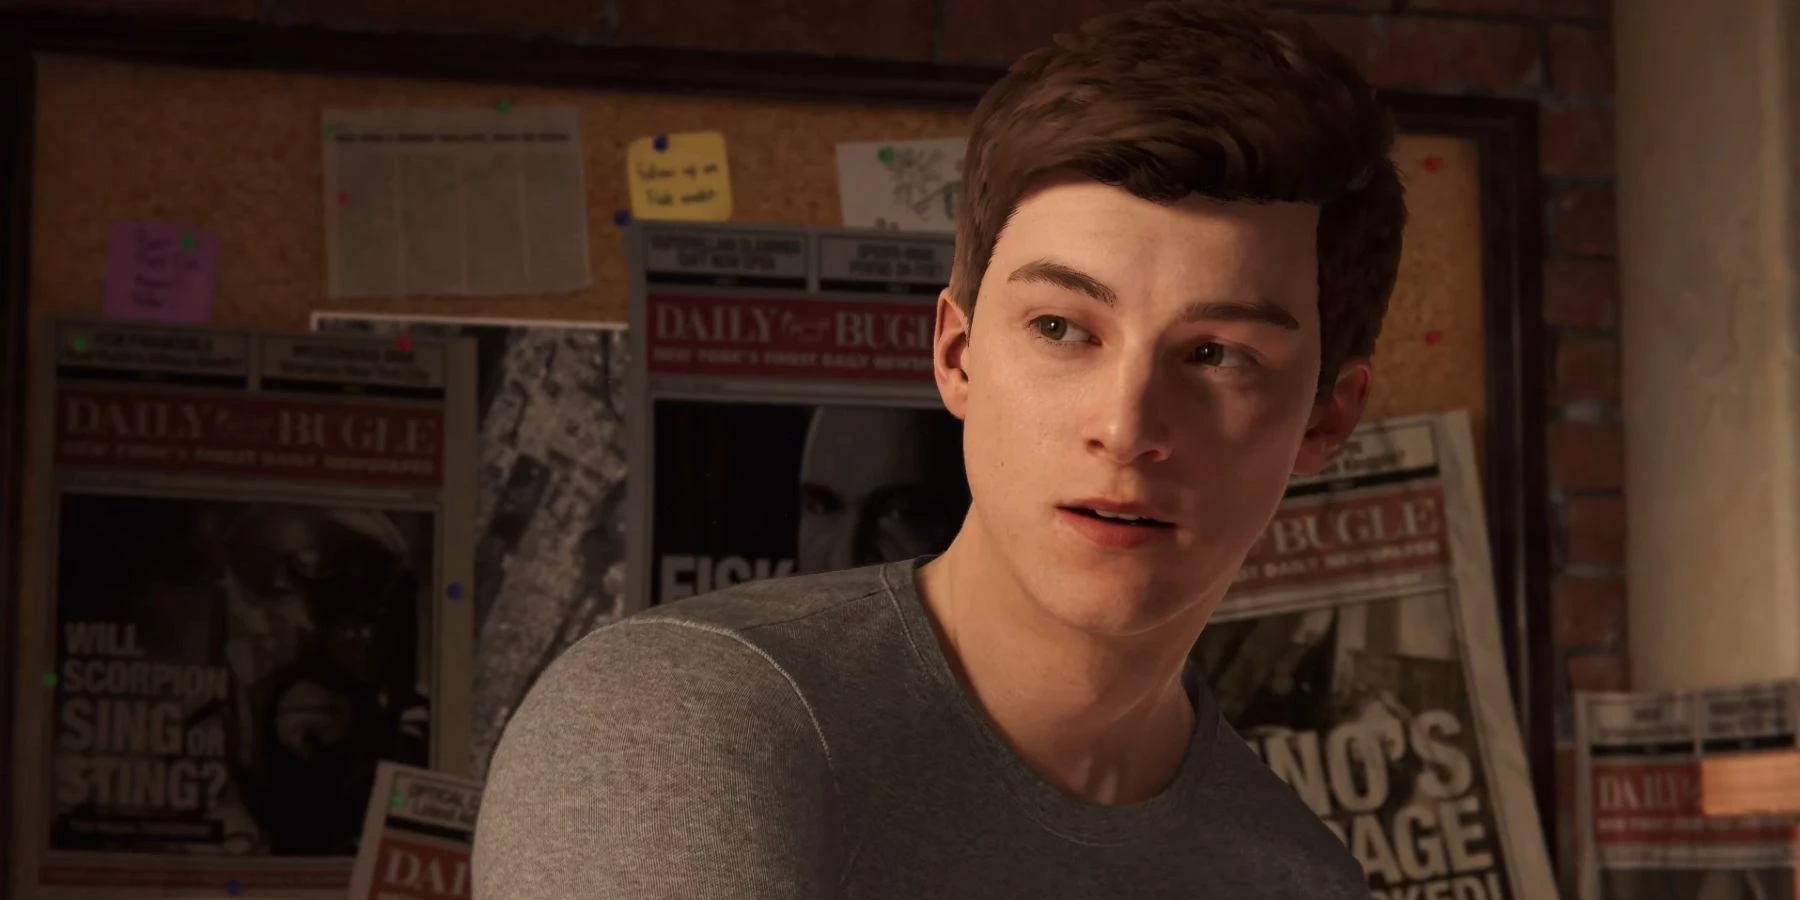 marvels-spider-man-on-pc-should-let-players-swap-between-peter-parkers-old-and-new-face-models-main